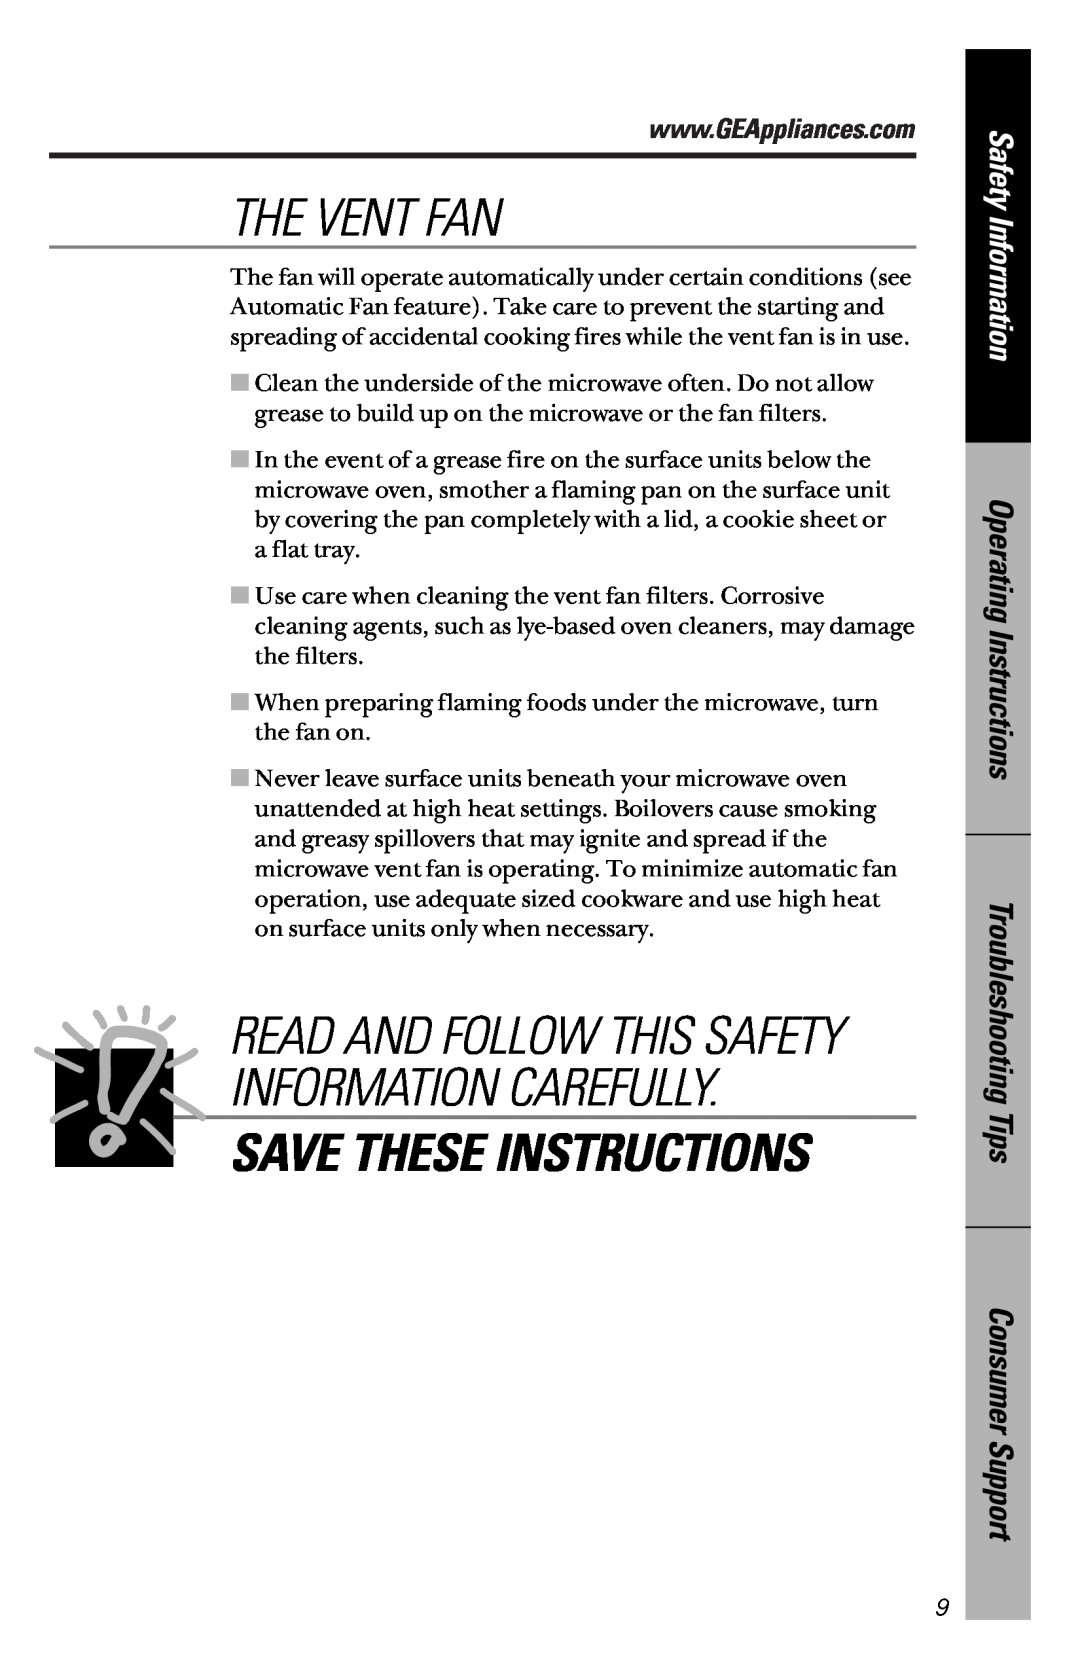 GE JVM1533 The Vent Fan, Save These Instructions, Read And Follow This Safety Information Carefully, Consumer Support 